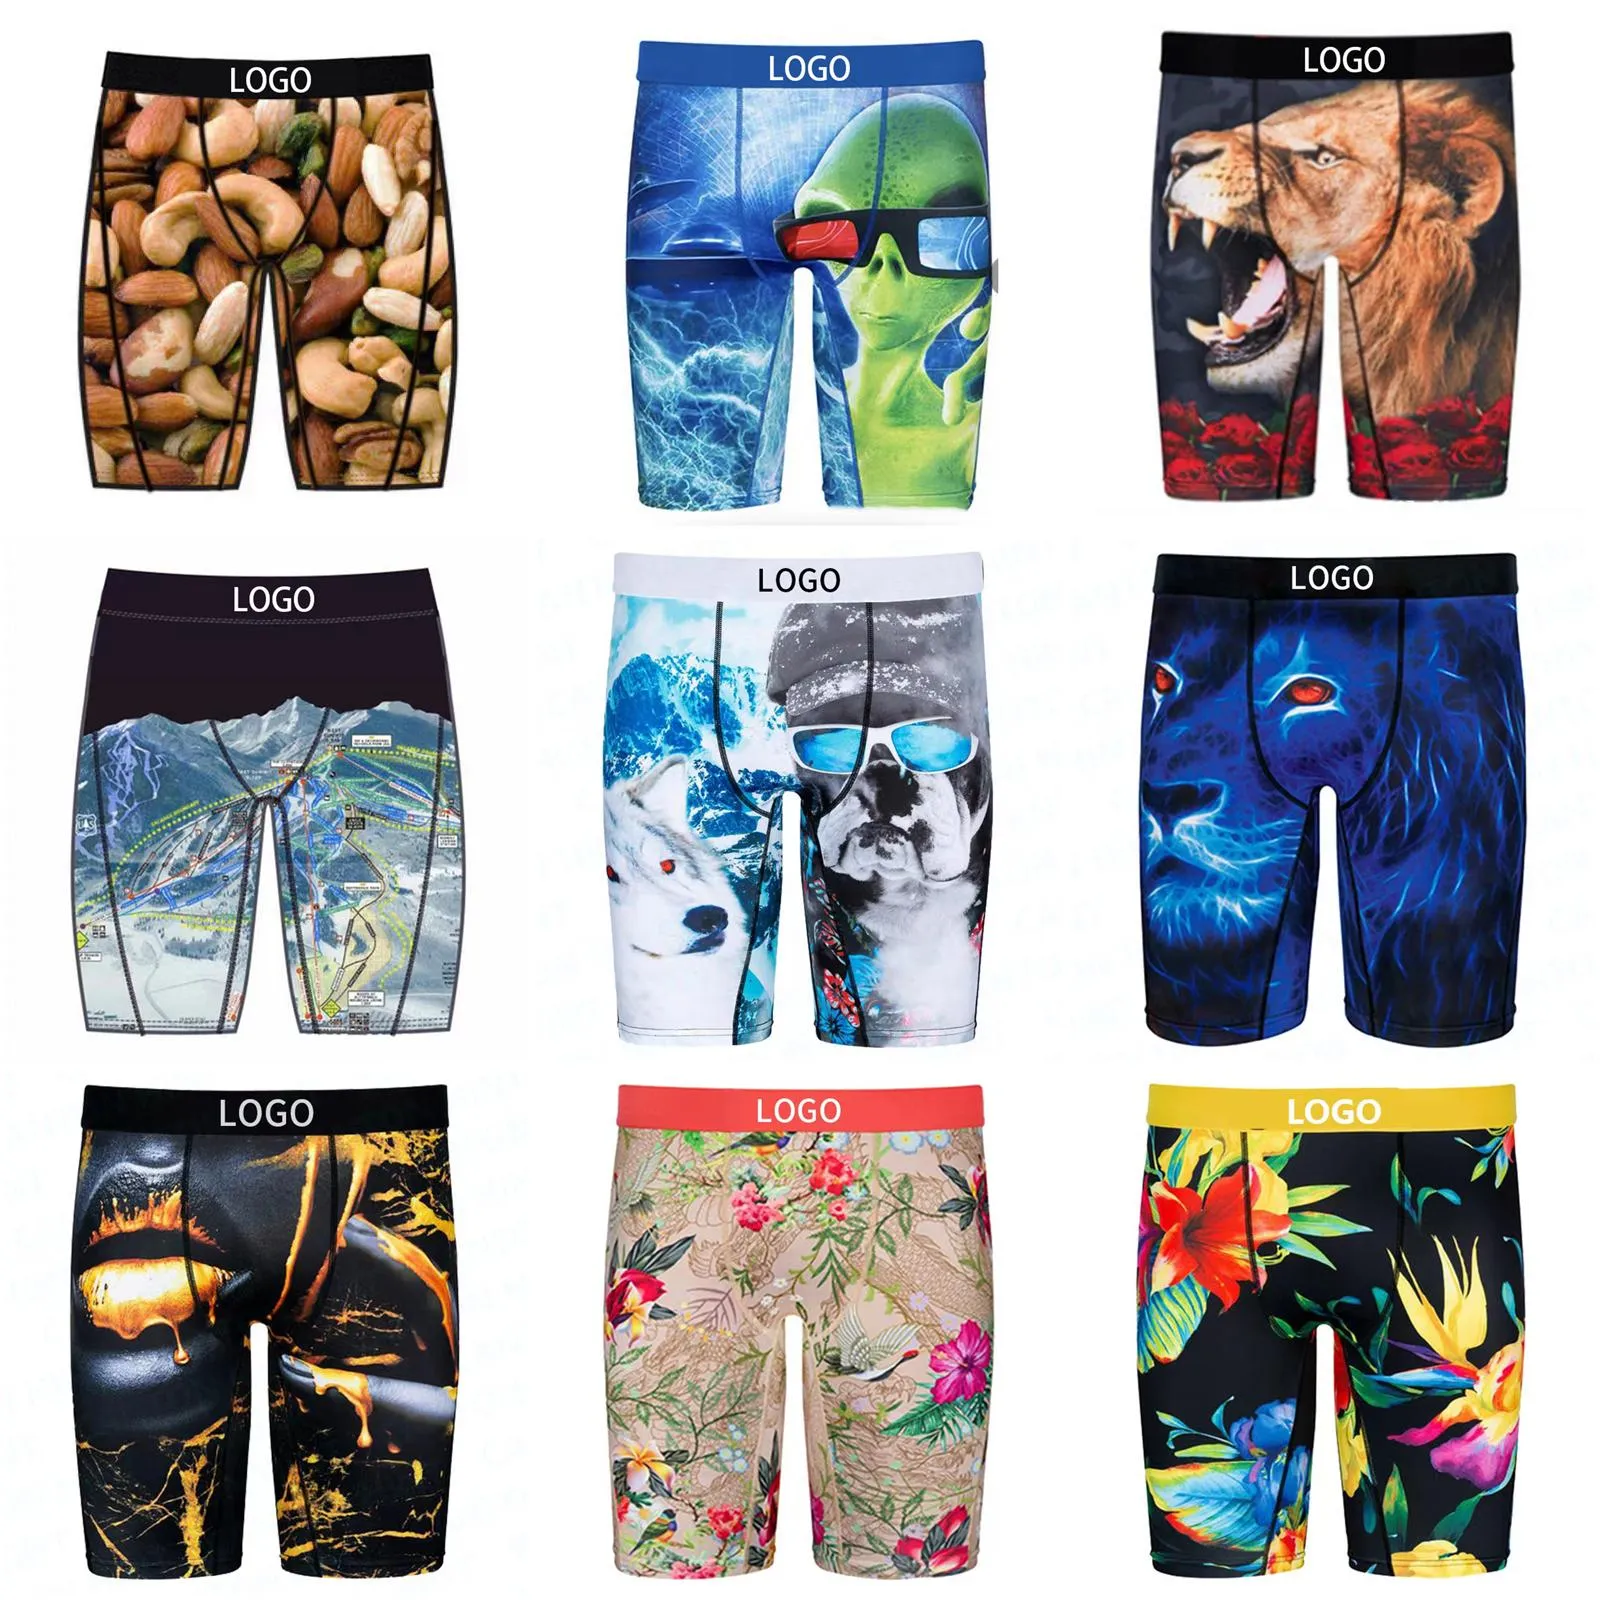 Mens Designer Beach Shorts Soft Printed Boxers With Breathable